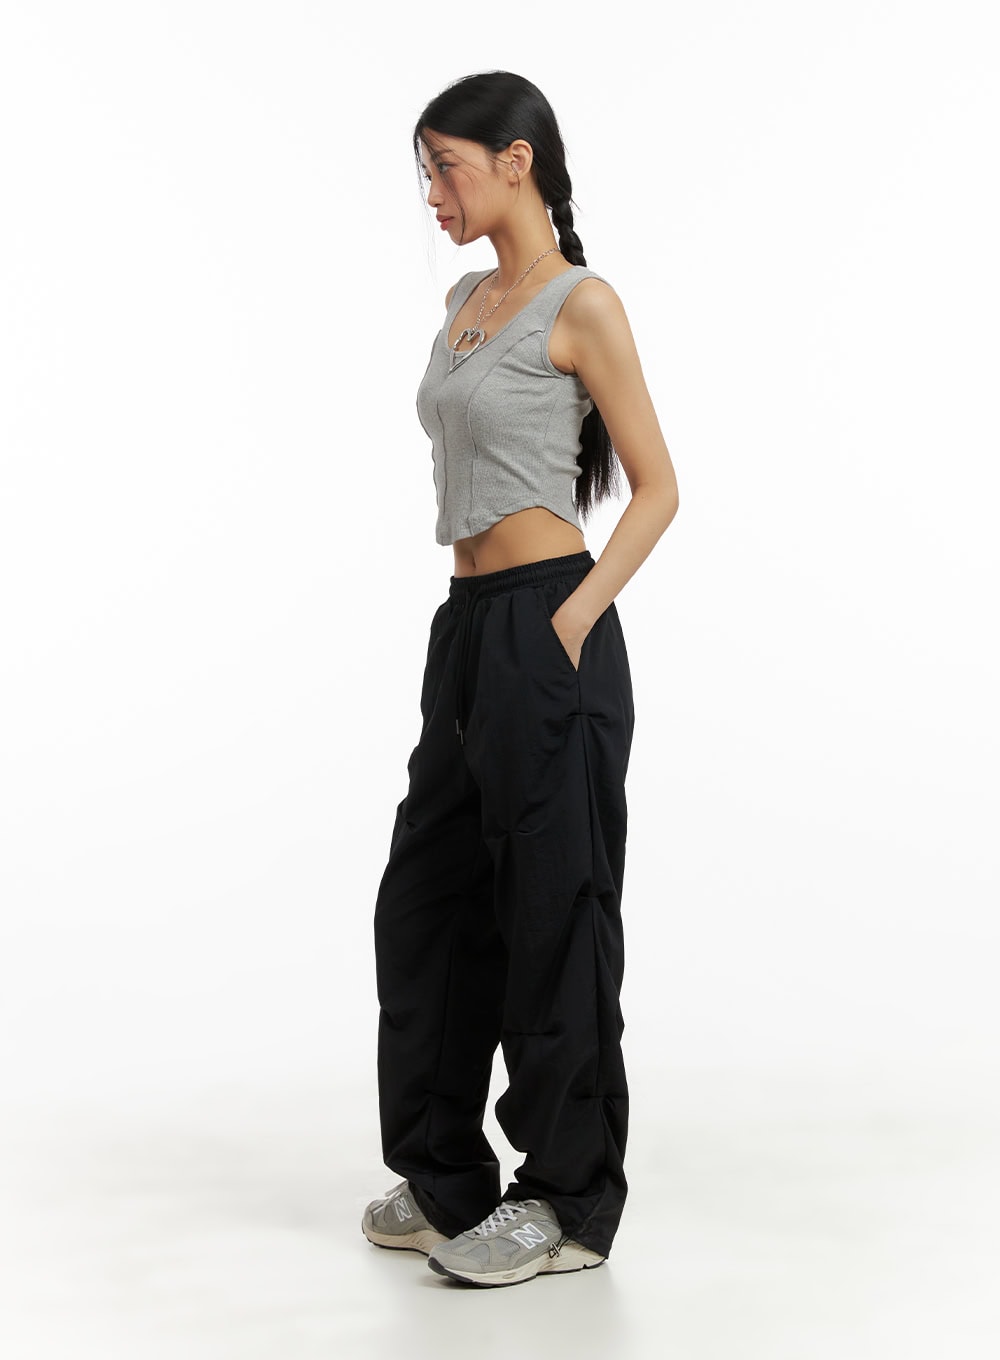 casual-wide-fit-nylon-pants-ca424